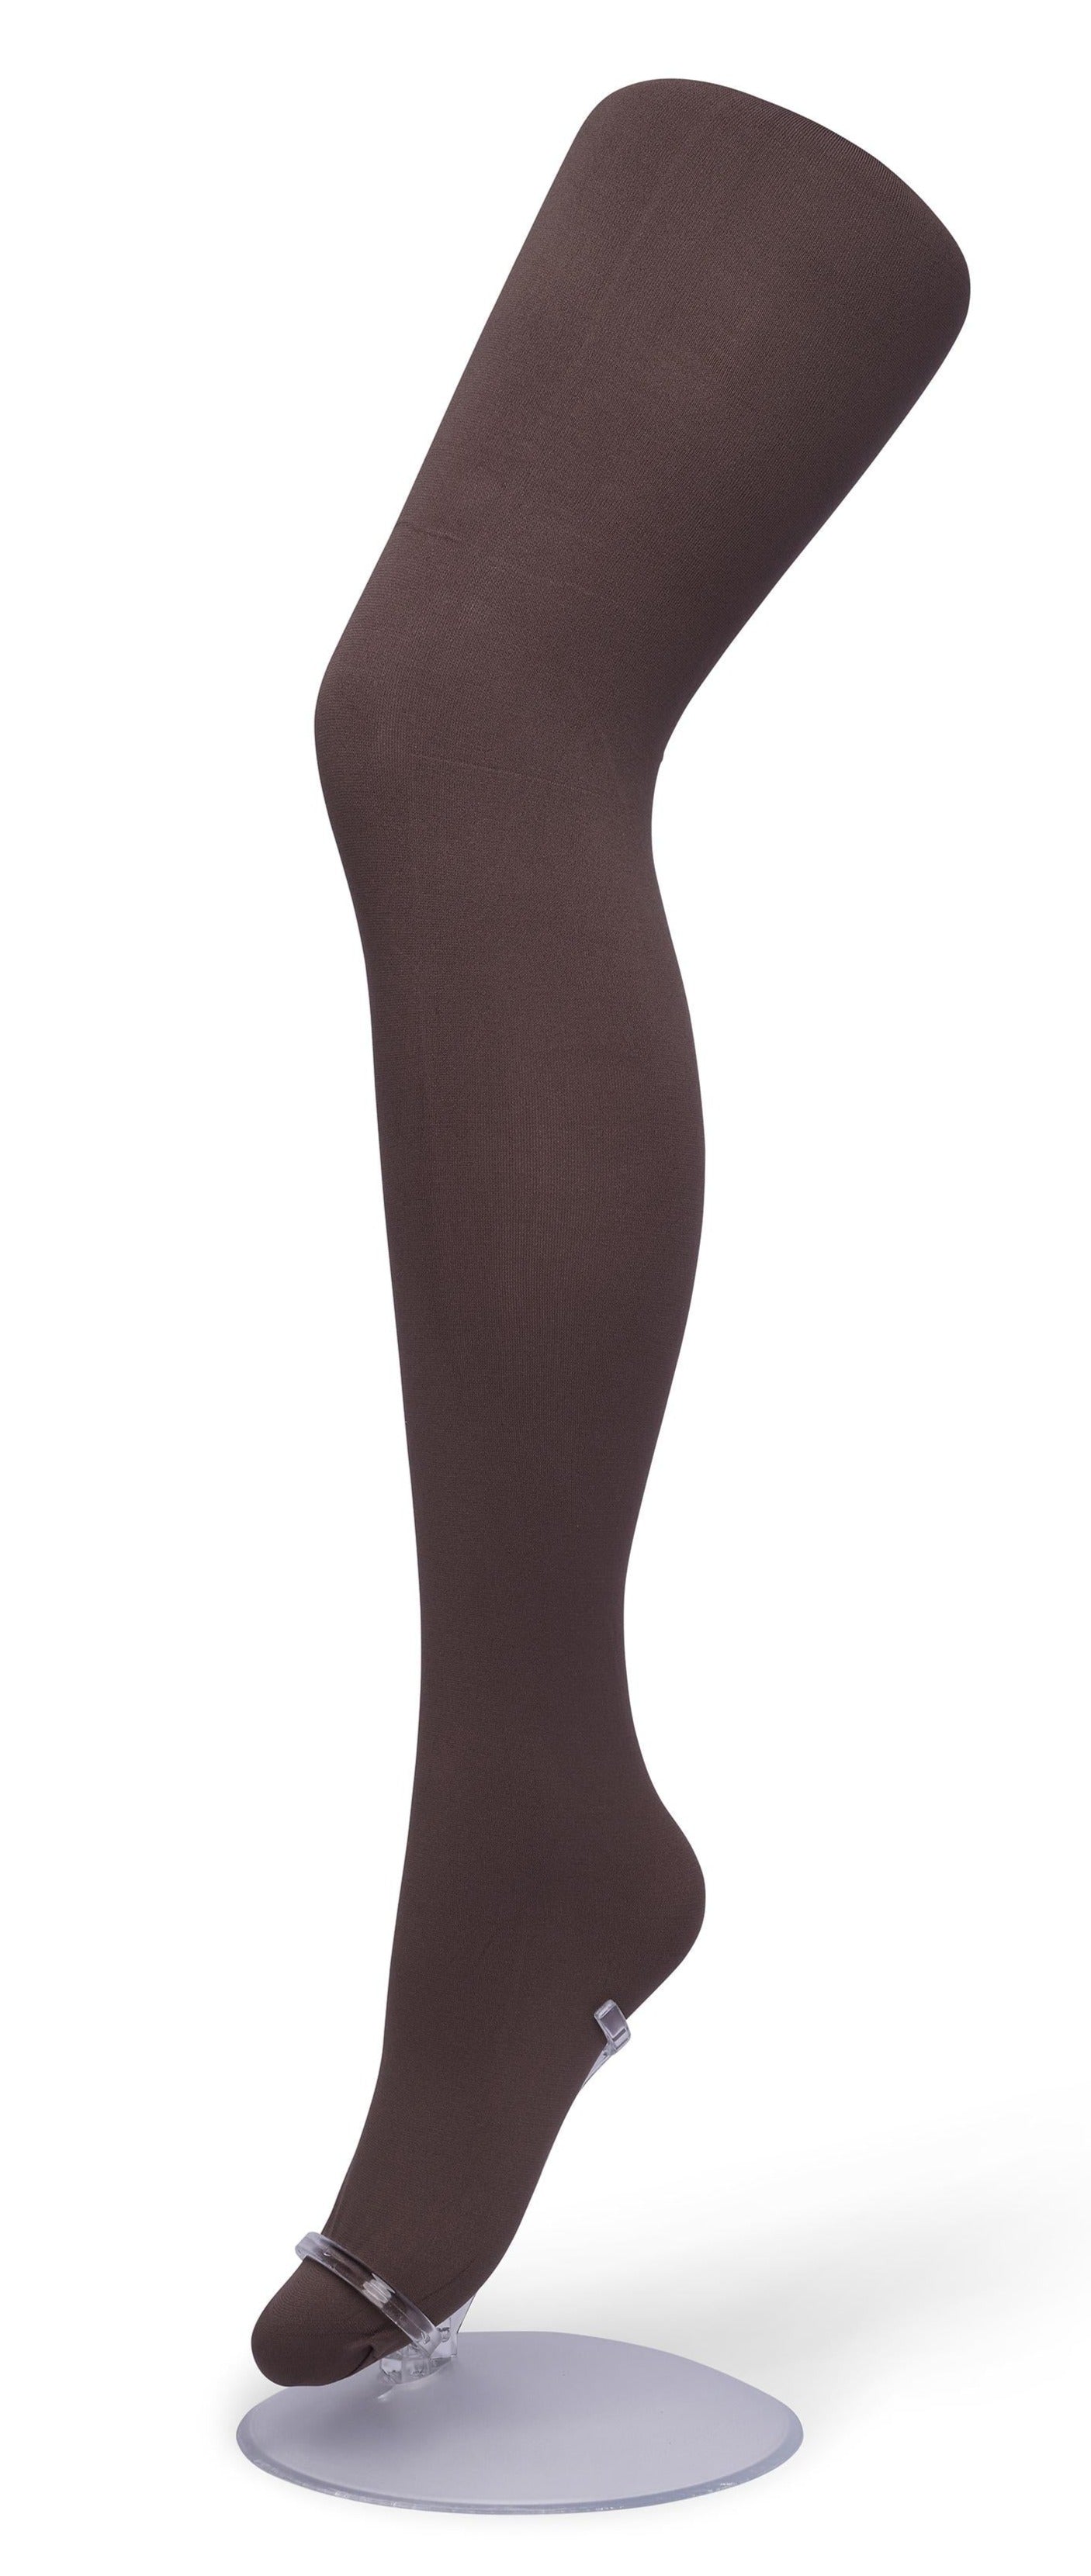 Bonnie Doon BN161912 Comfort Tights XXL - Light Brown Taupe (shopping bag) 70 denier soft opaque plus size tights with an extra panel in the body, extra deep waistband and flat seams.